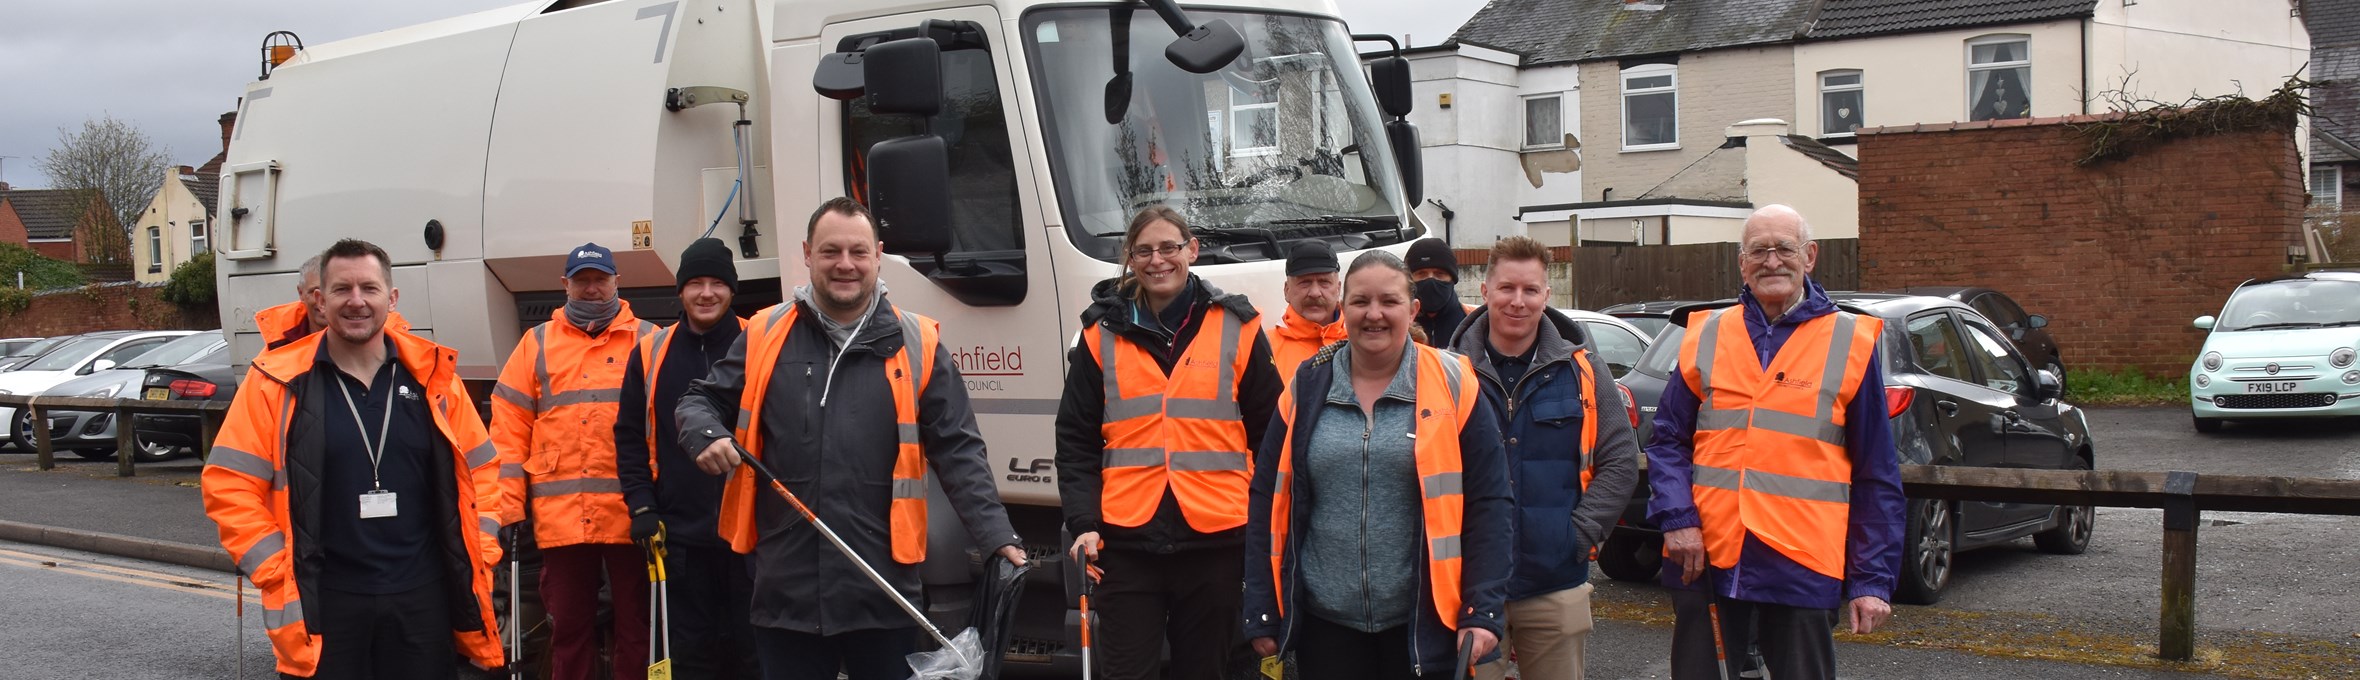 Refuge vehicle on street with councilors, volunteers and picking equipment 